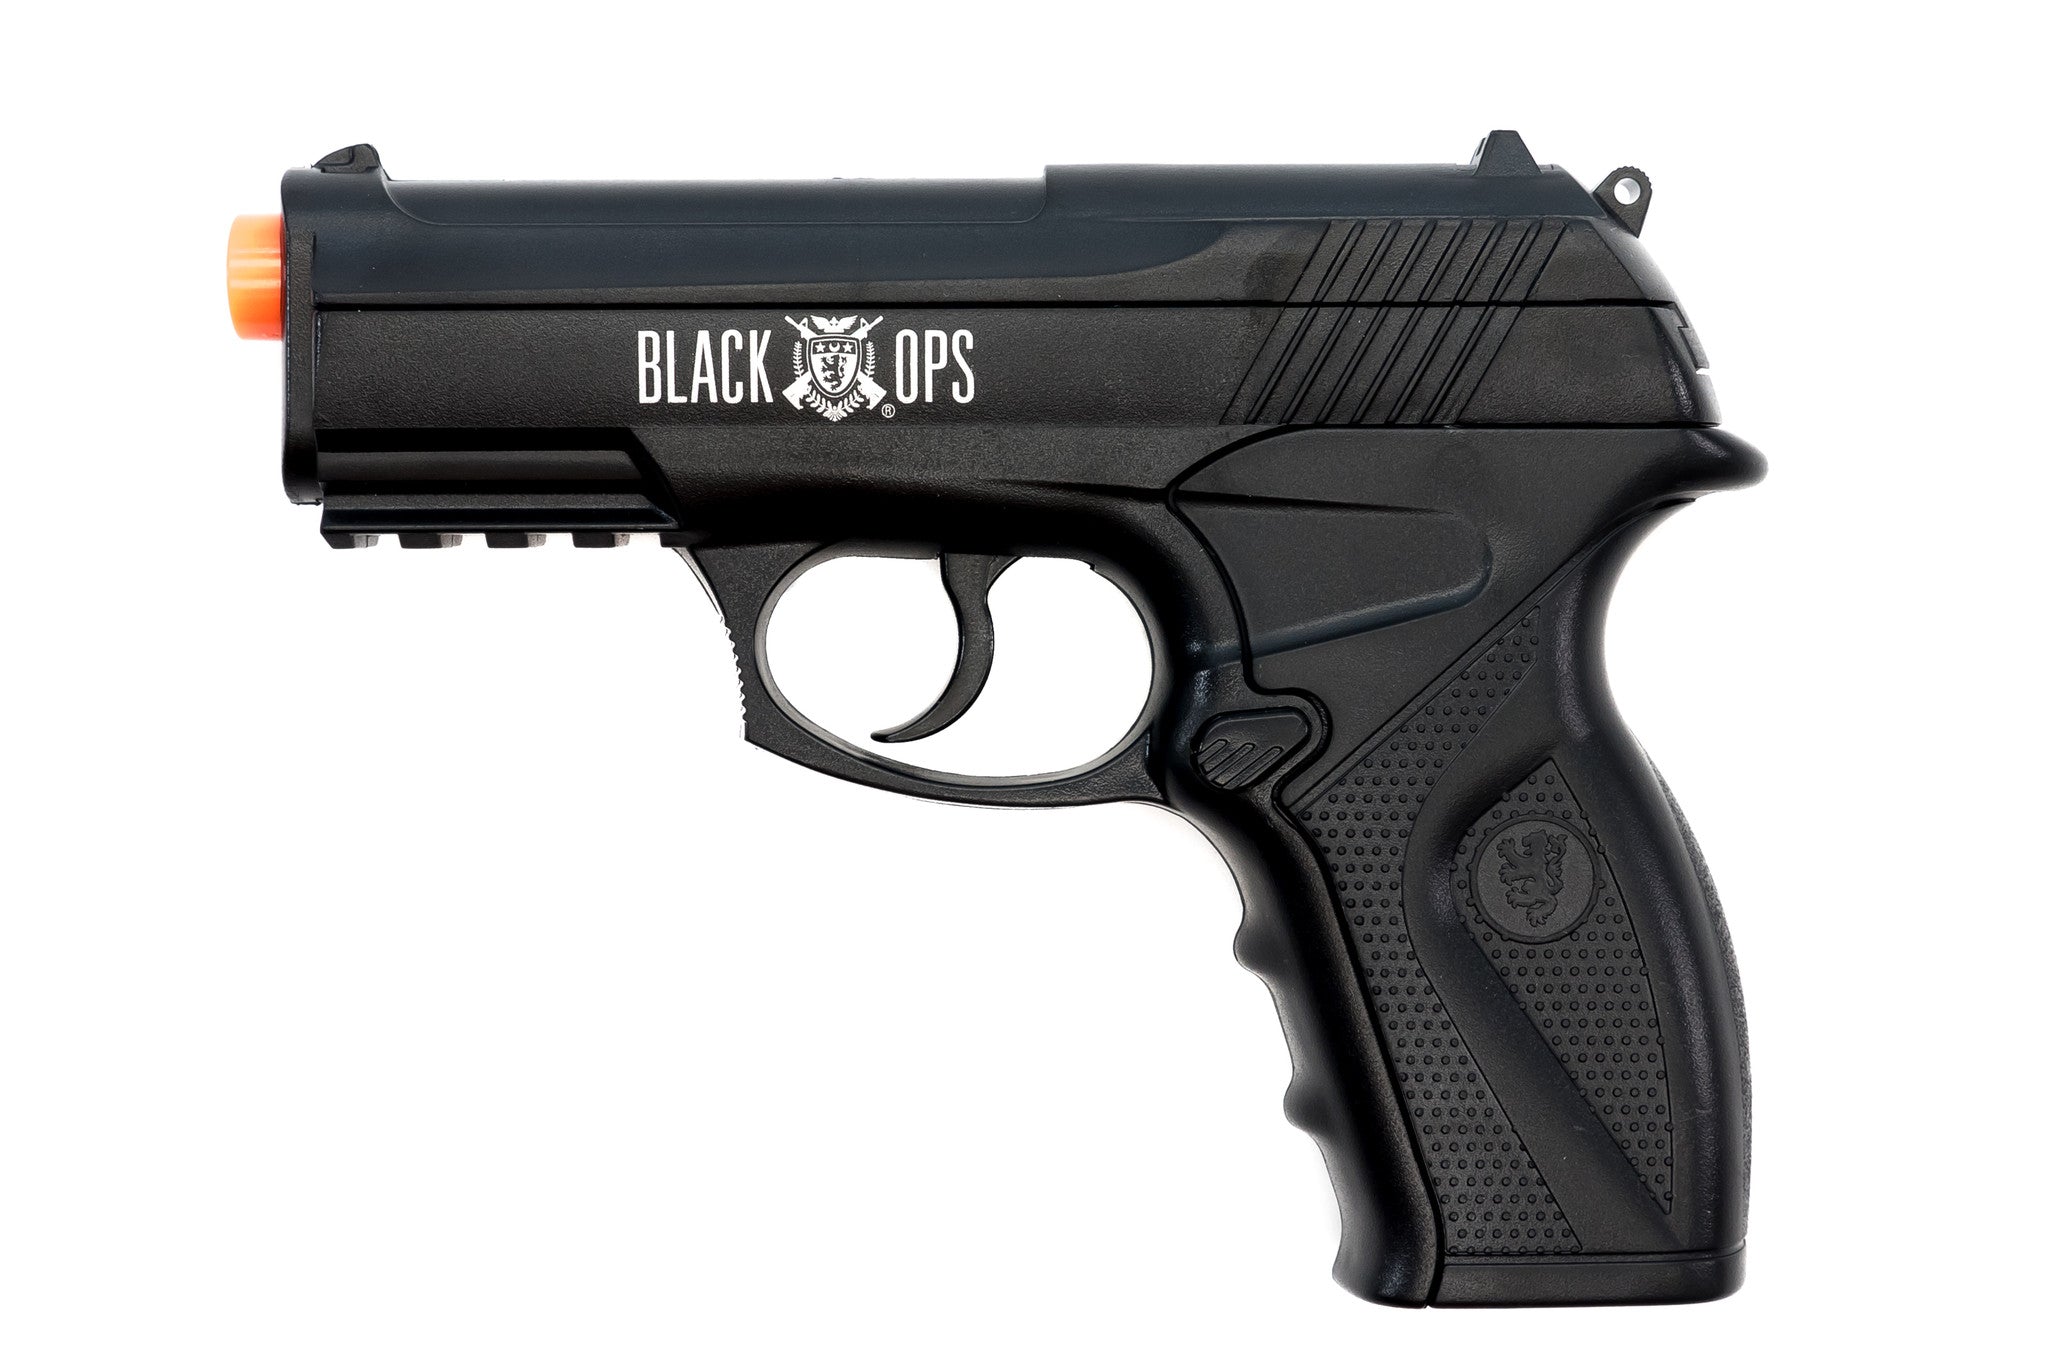 Black Ops BOA Semi Automatic Airsoft Pistol - C02 Powered - Black Ops USA